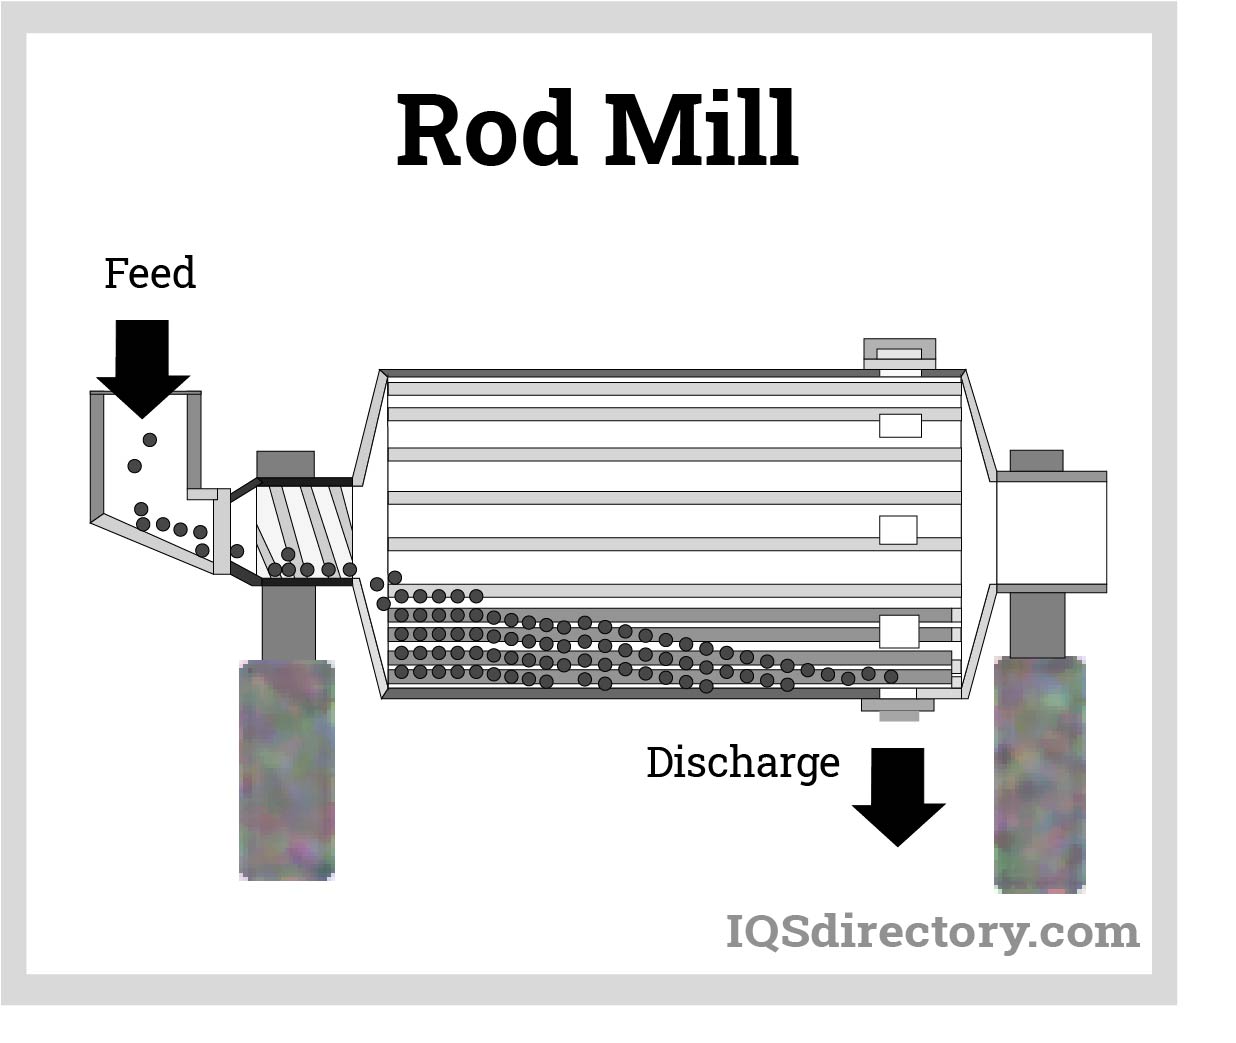 Mills: What are they? How are Mills used? Advantages